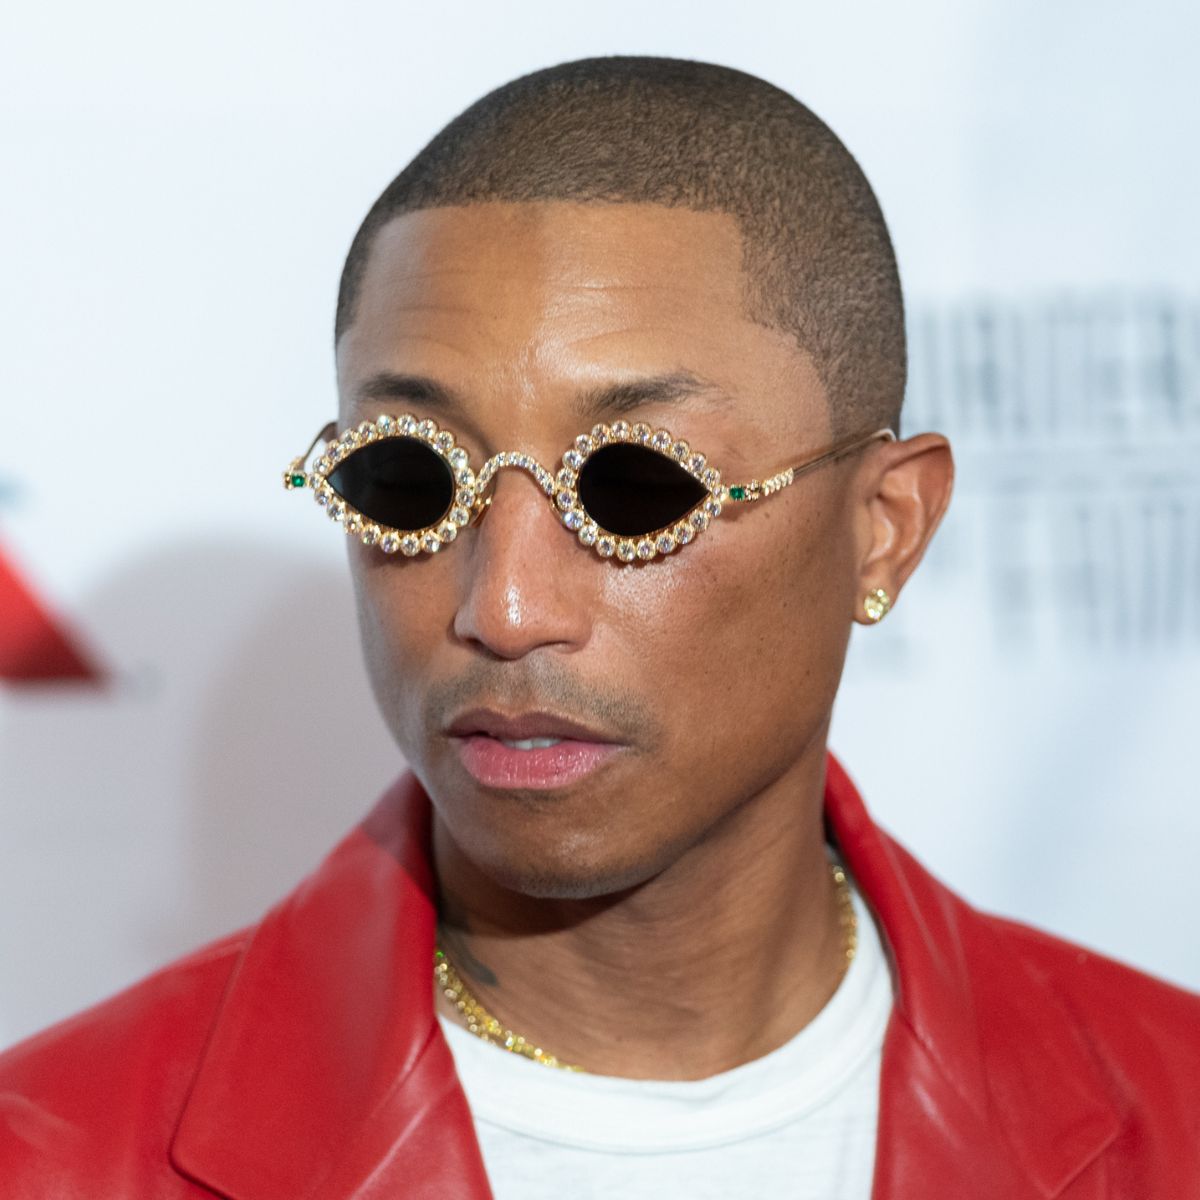 pharrell-williams-buzz-cut-with-line-up-hairstyle-haircut-man-for-himself-ft.jpg